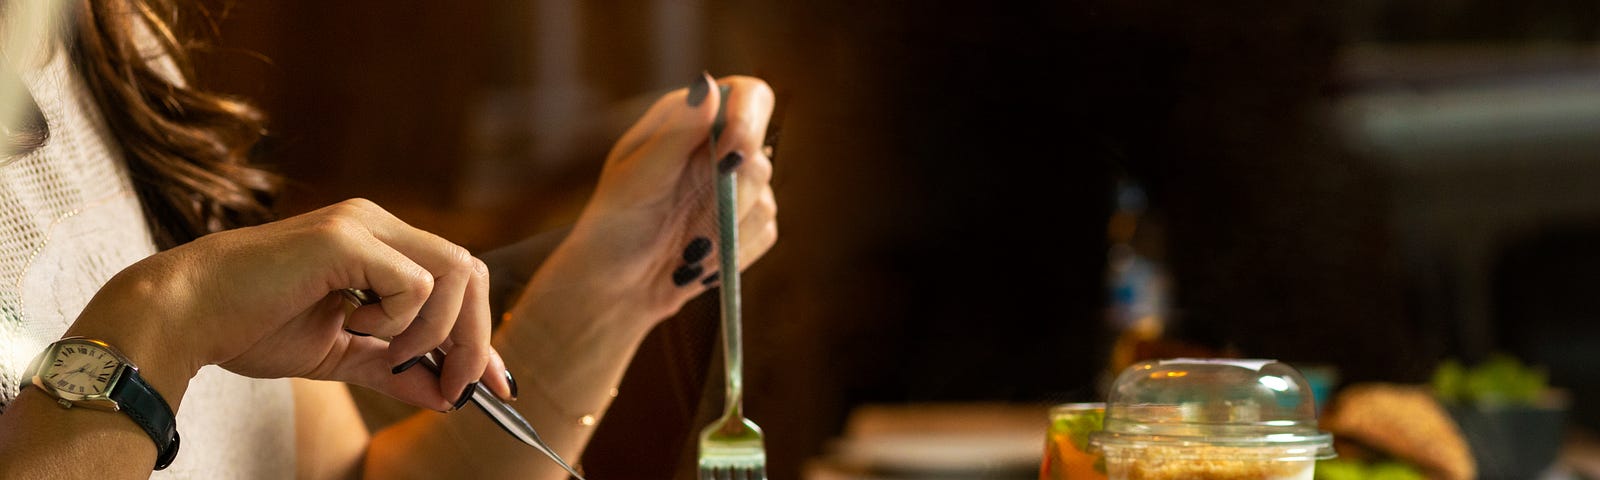 a woman’s hands holding a fork and knife, digging into a bowl of greens